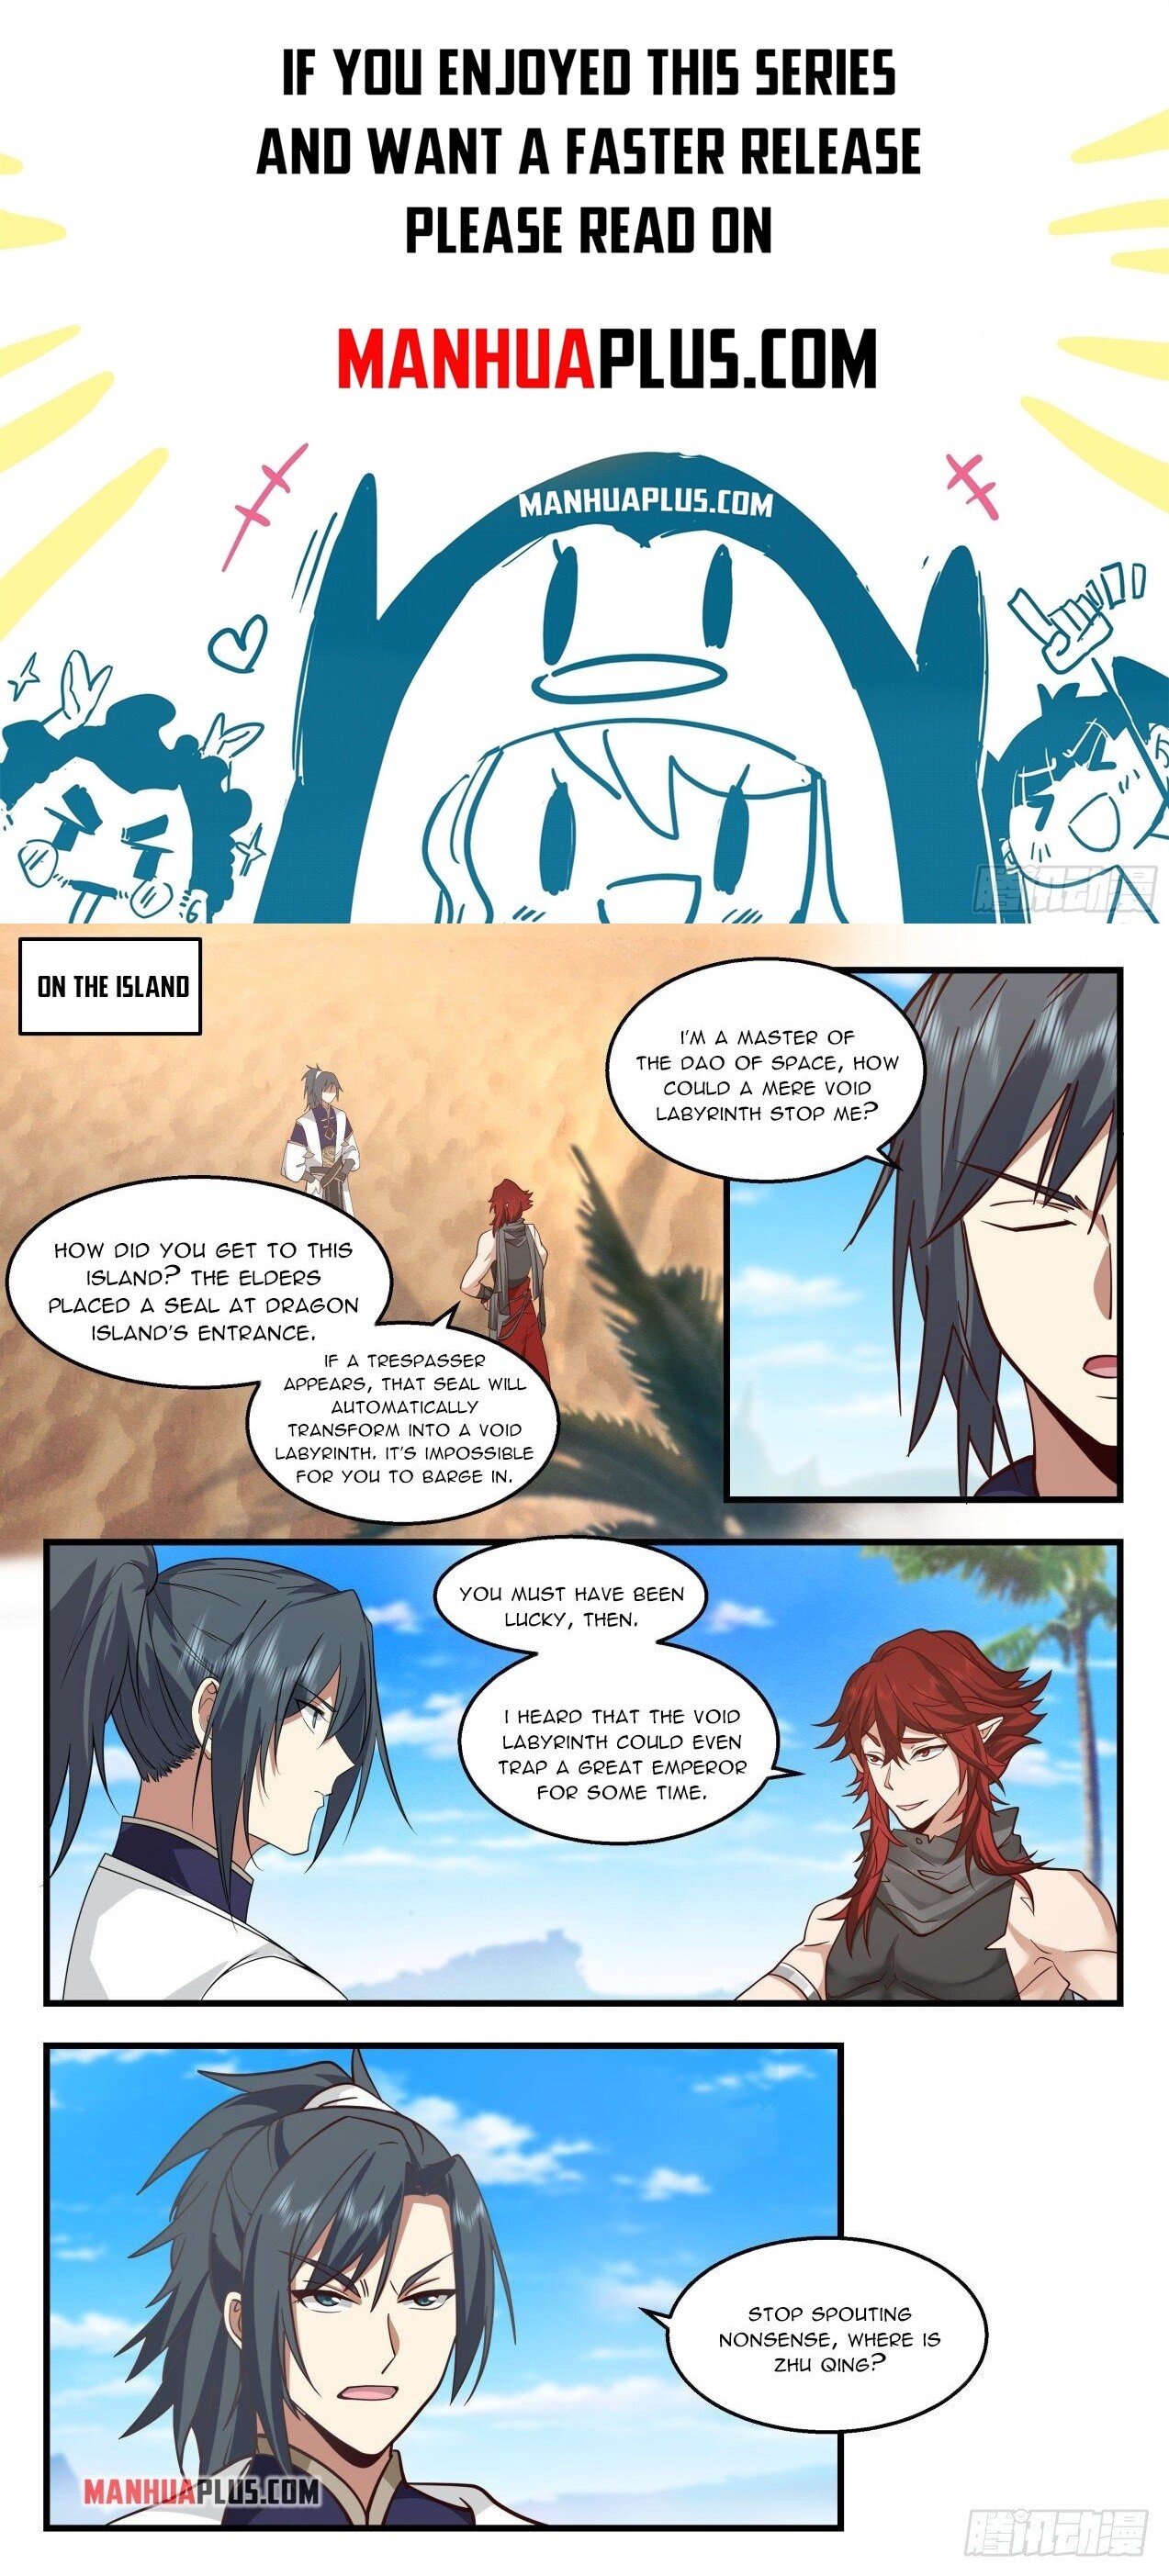 Martial Peak - Chapter 14206 - Zhu Qing's marriage - Image 1